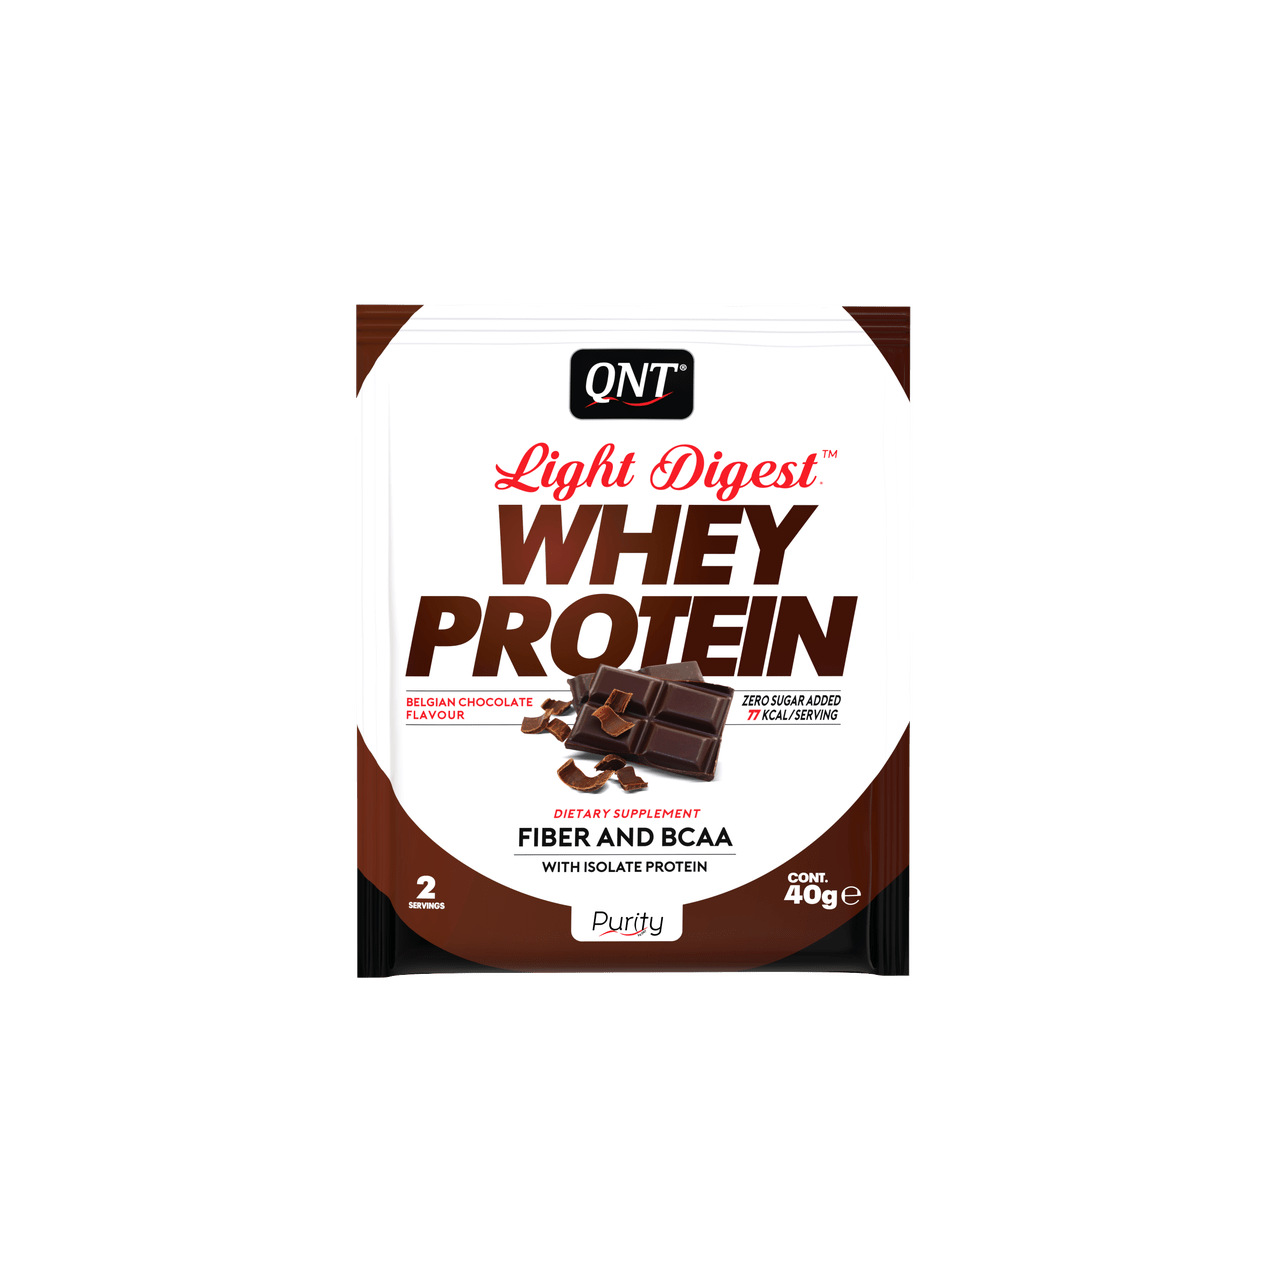 QNT Light Digest Whey Protein 500 g - Belgian Chocolate,  ml, QNT. Whey Protein. recovery Anti-catabolic properties Lean muscle mass 